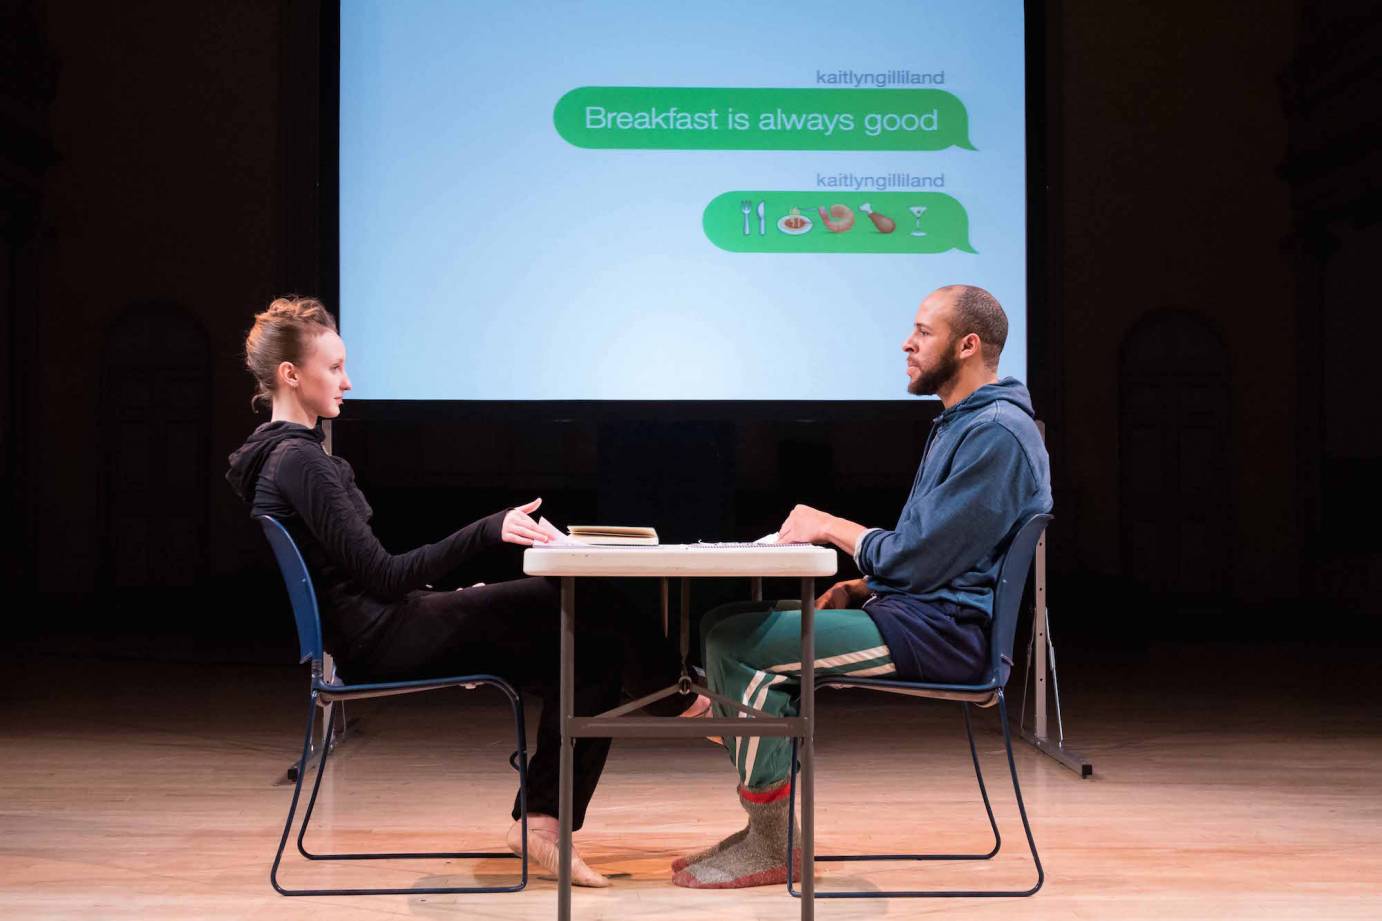 Kaitlyn Gilliland and Will Rawls sitting at a table in #loveyoumeanit with a projection of their text messages in the background.